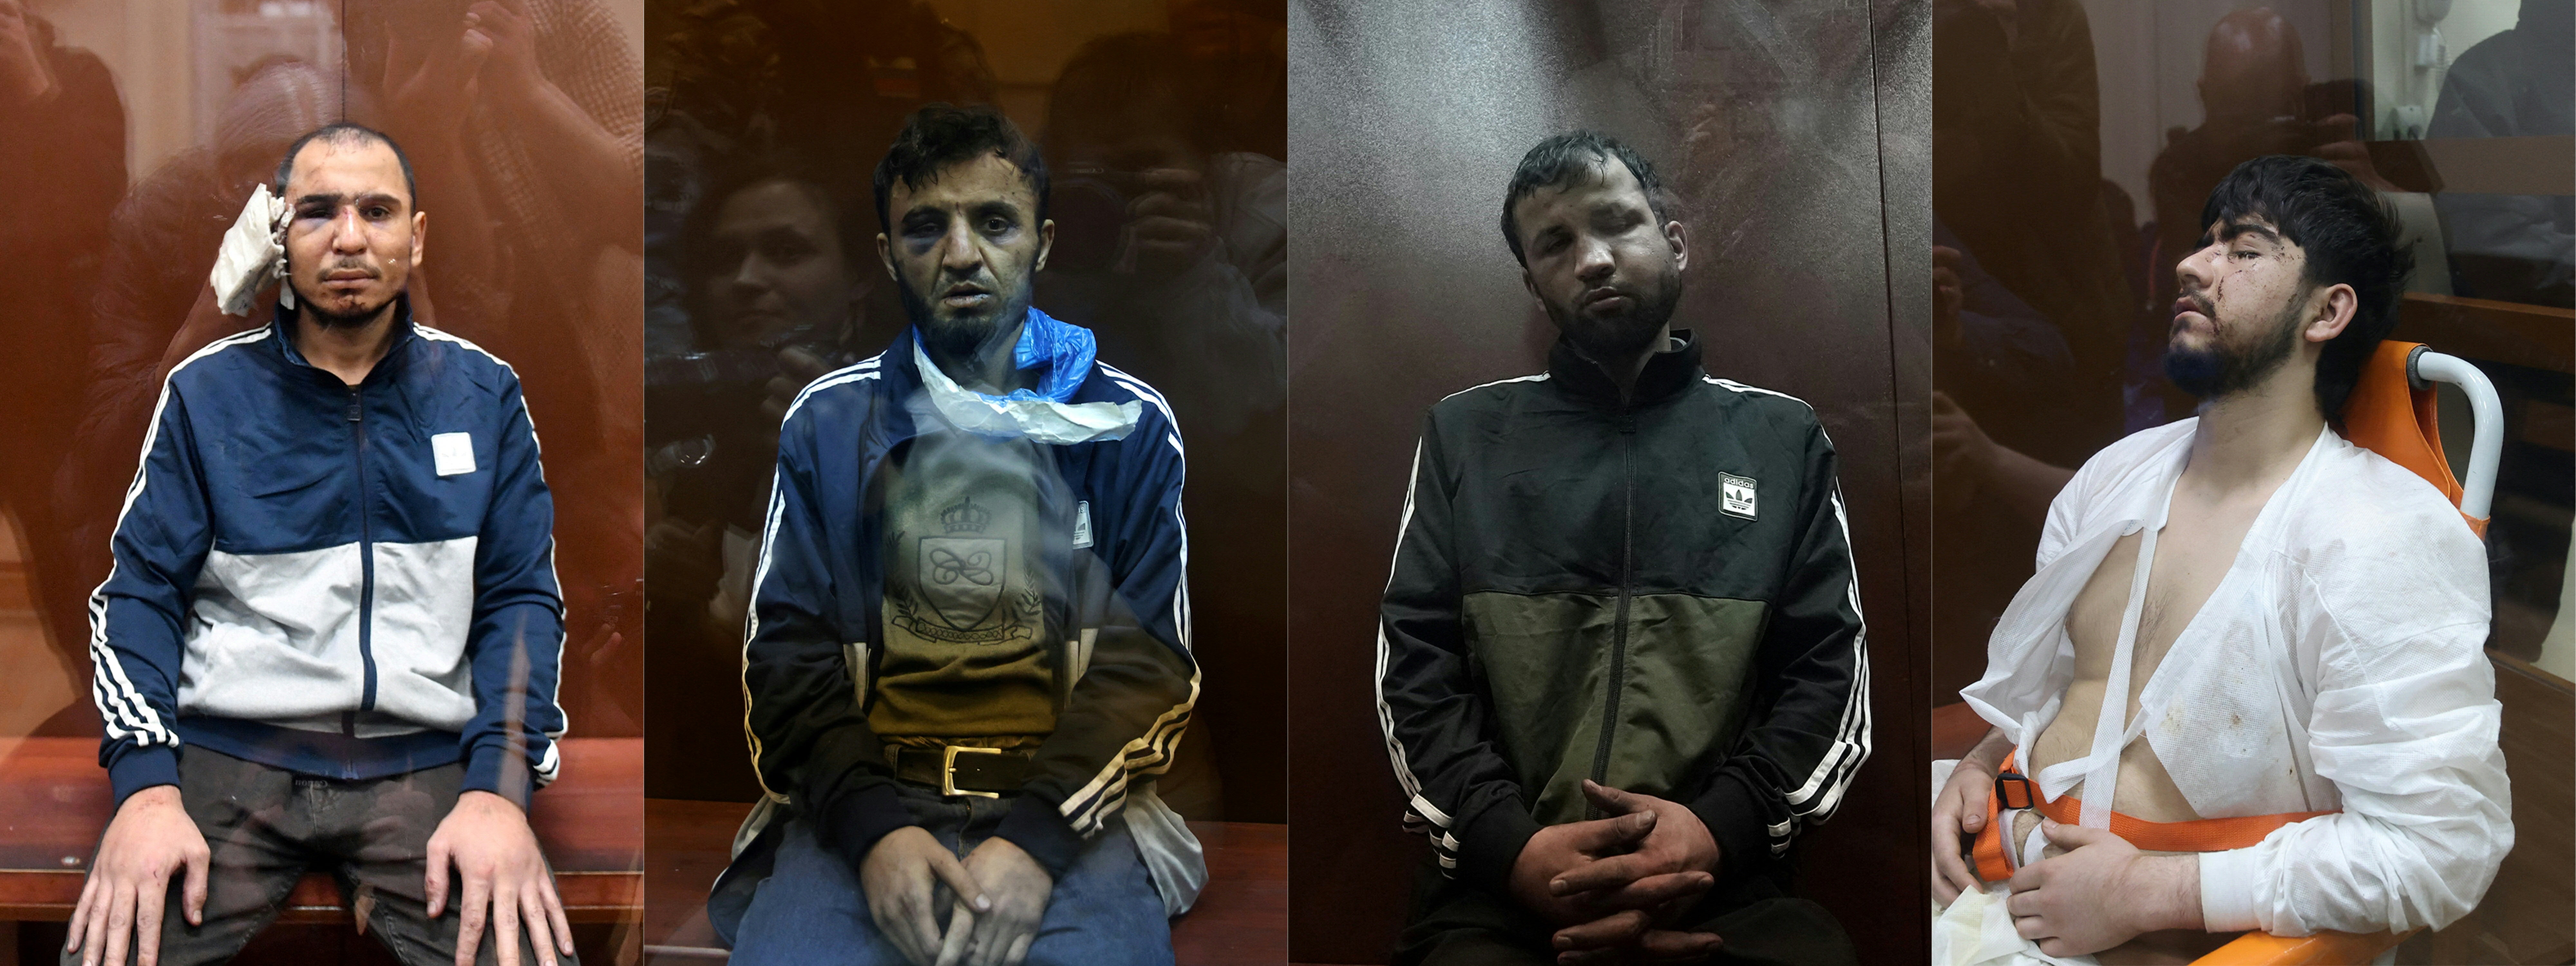 This combination of pictures created on March 24, 2024 shows (from L) Saidakrami Murodalii Rachabalizoda, Dalerdjon (alternatively spelled Dalerdzhon) Barotovich Mirzoyev, Shamsidin Fariduni and Muhammadsobir Fayzov suspected of taking part in the attack of a concert hall that killed 137 people, the deadliest attack in Europe to have been claimed by the Islamic State jihadist group in decades